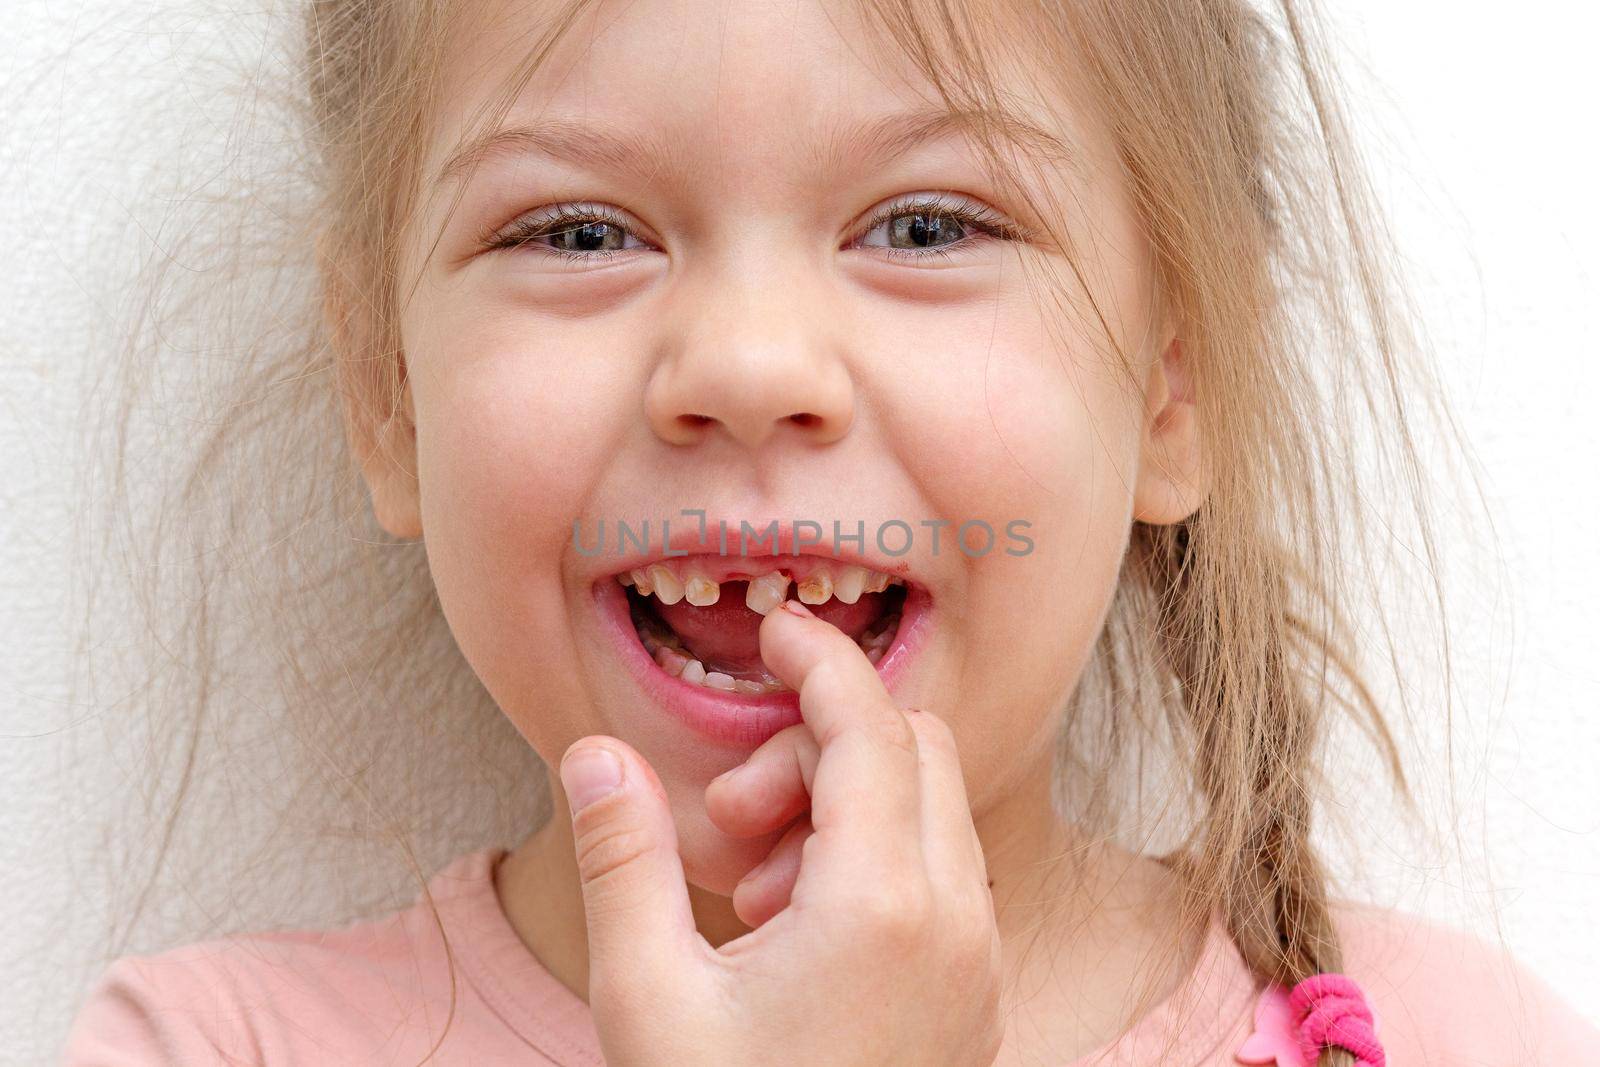 Happy and smiling caucasian little girl of 5-6 years touching loose tooth by finger looking at camera